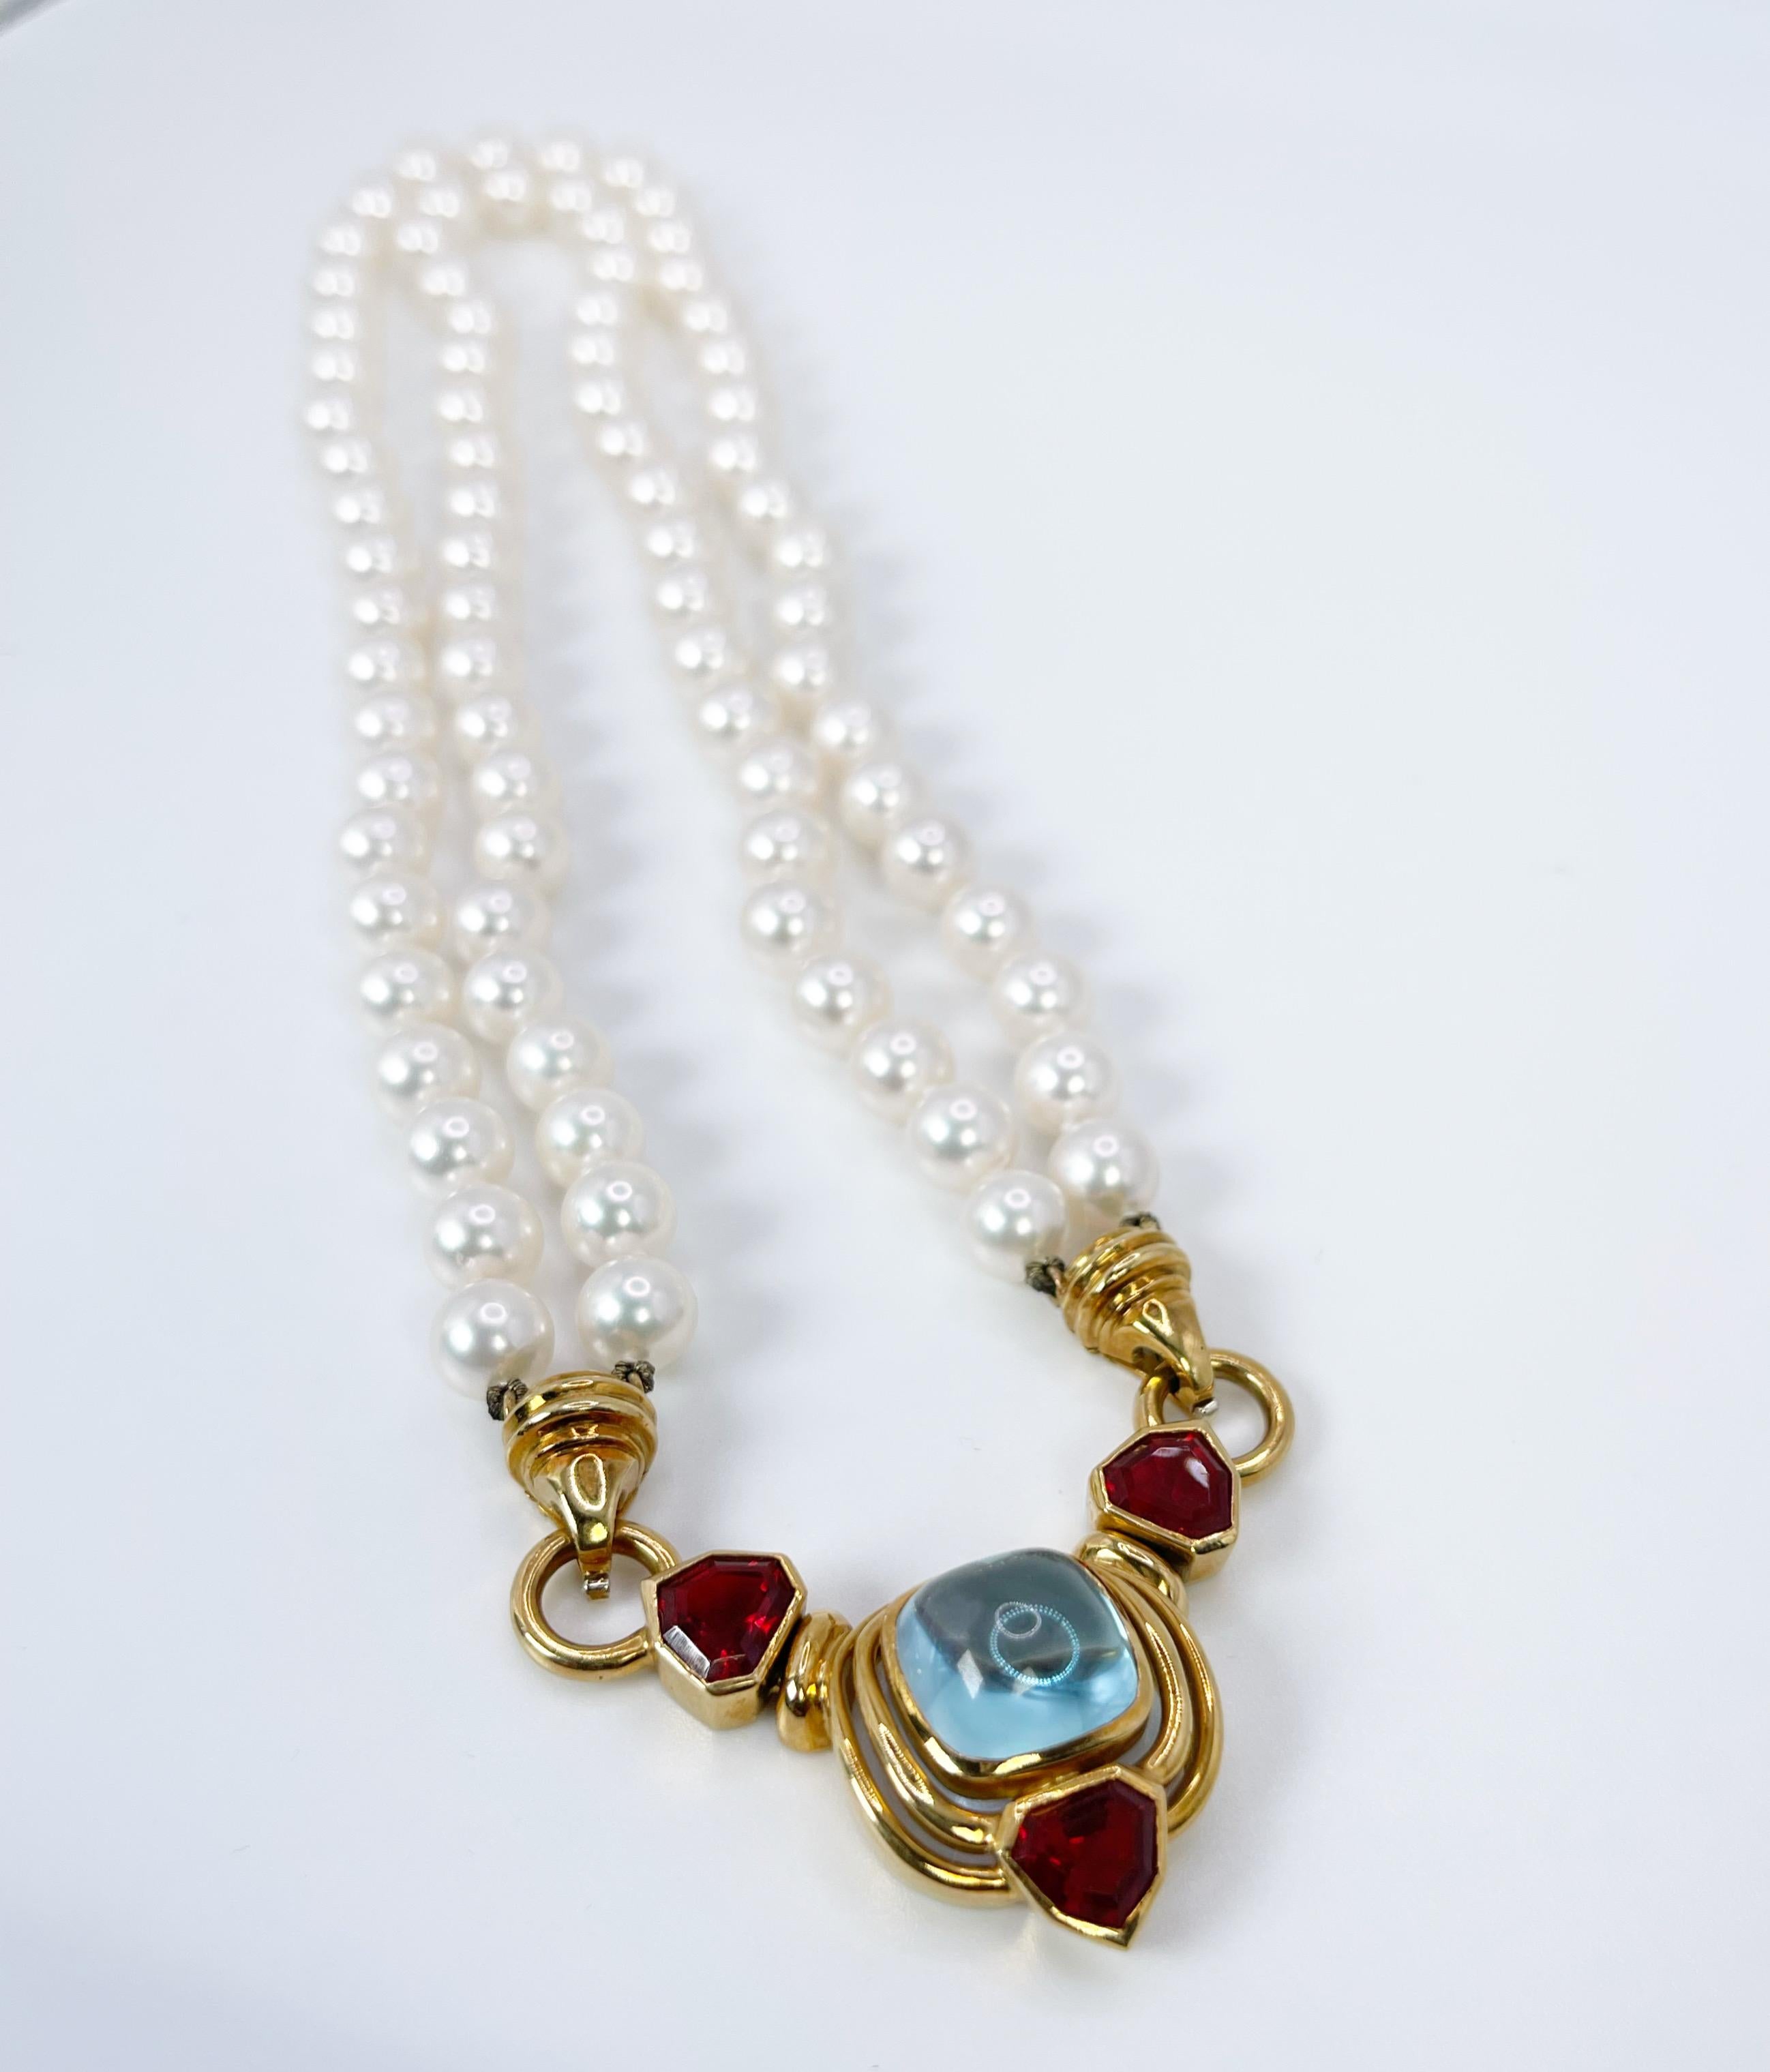 Cabochon Pearl & Gemstone Necklace 18KT Yellow Gold Fire Opals Necklace